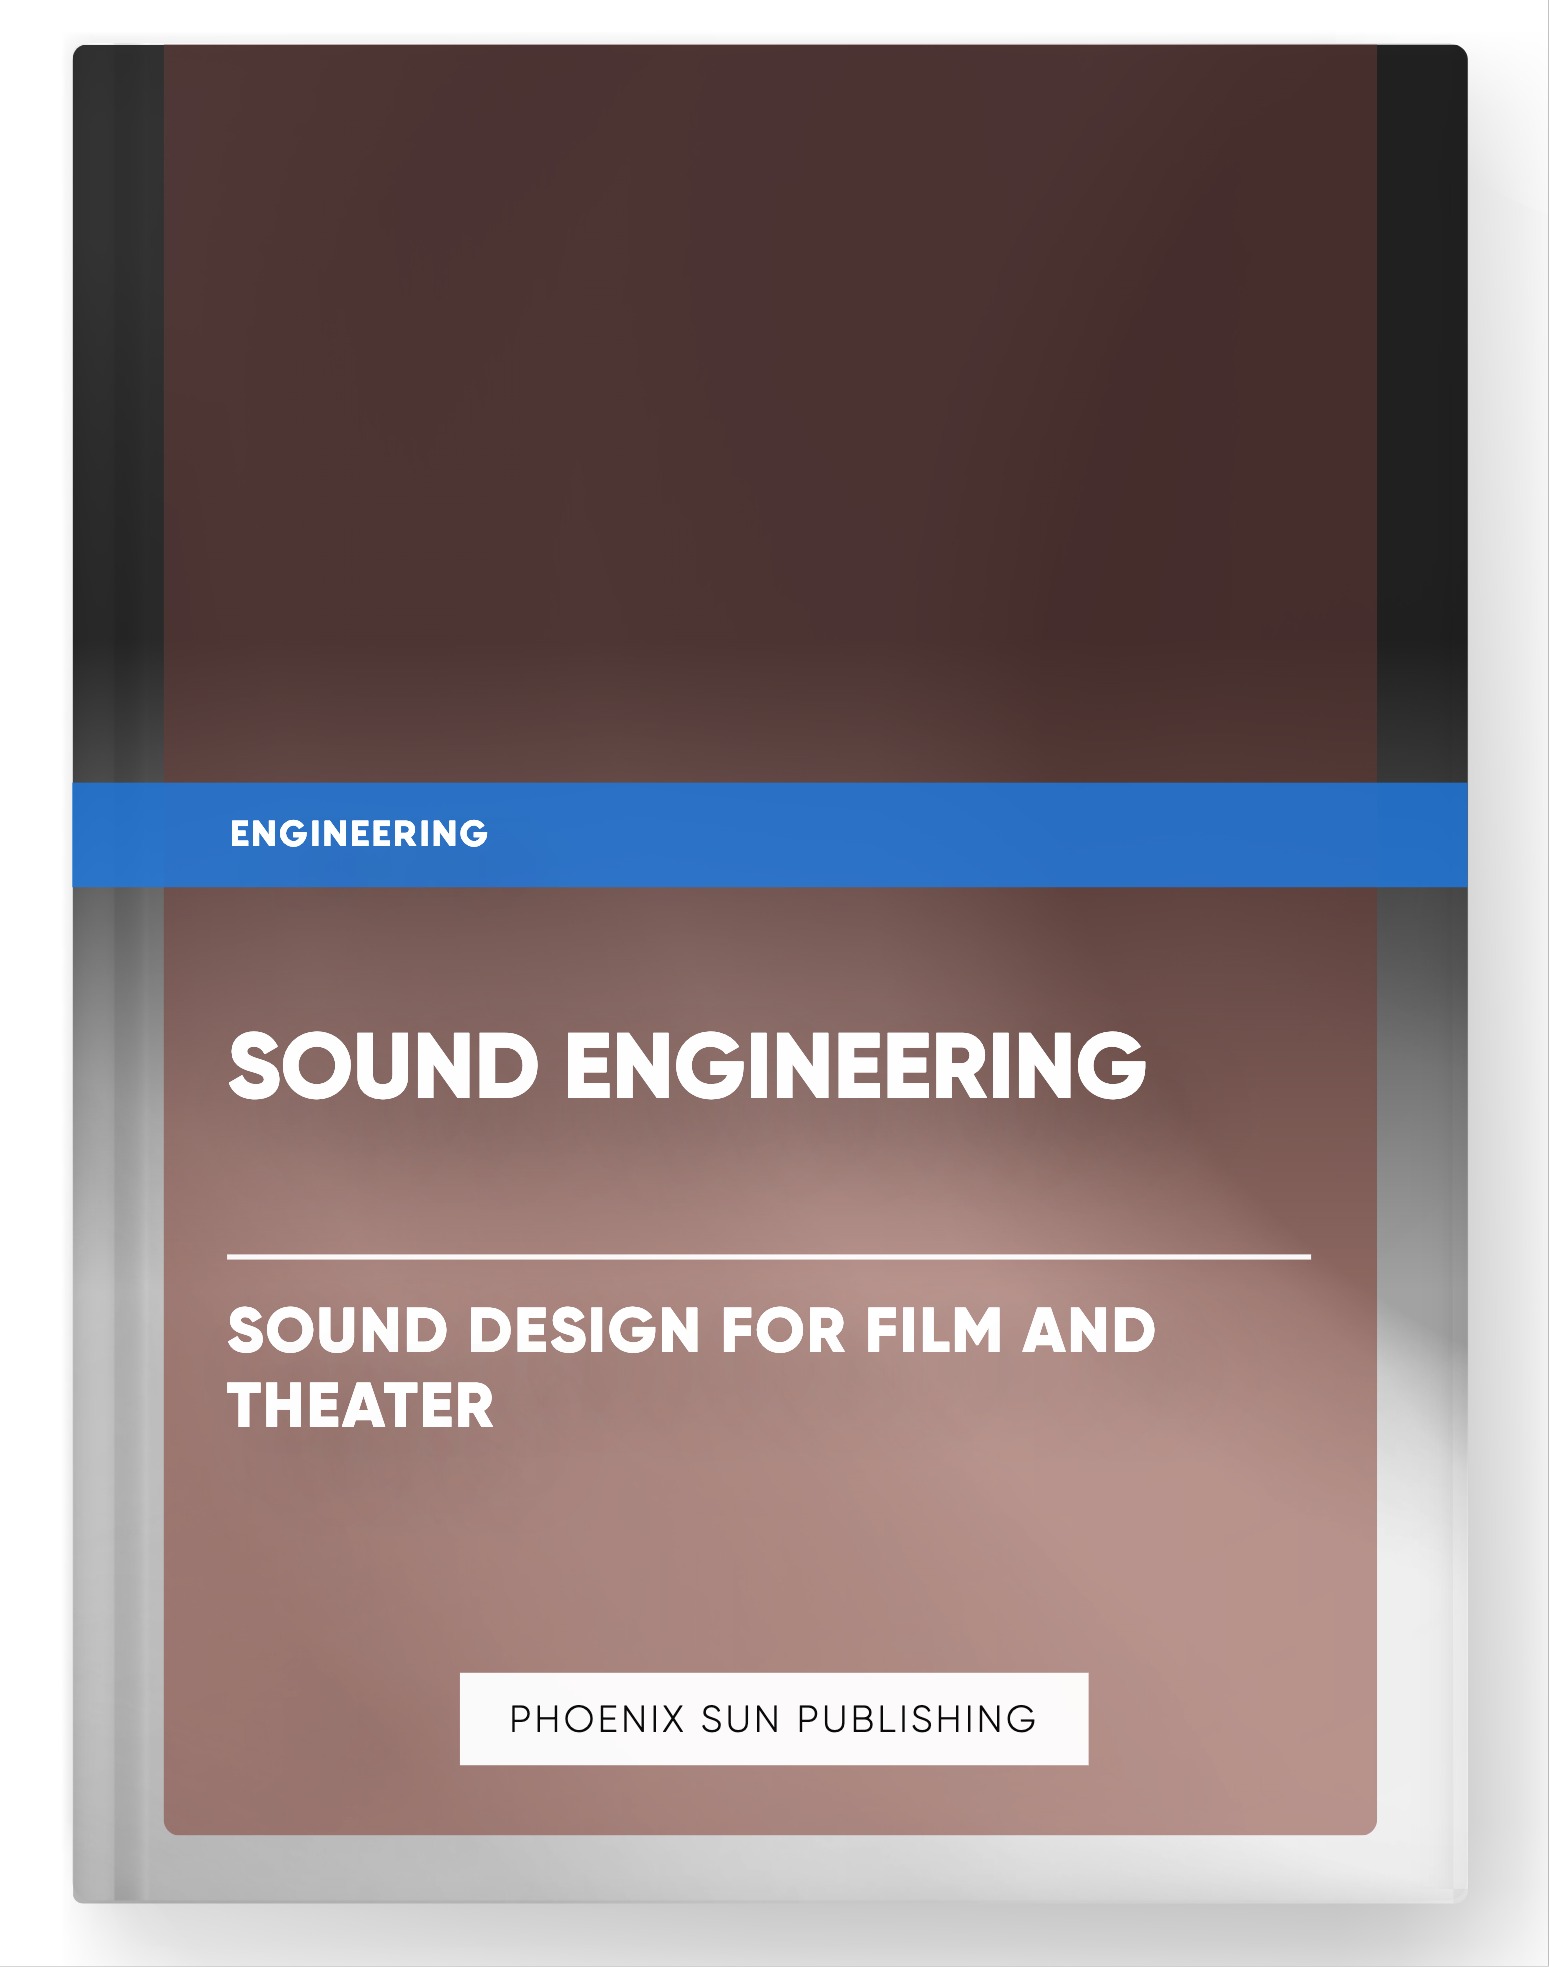 Sound Engineering – Sound Design for Film and Theater